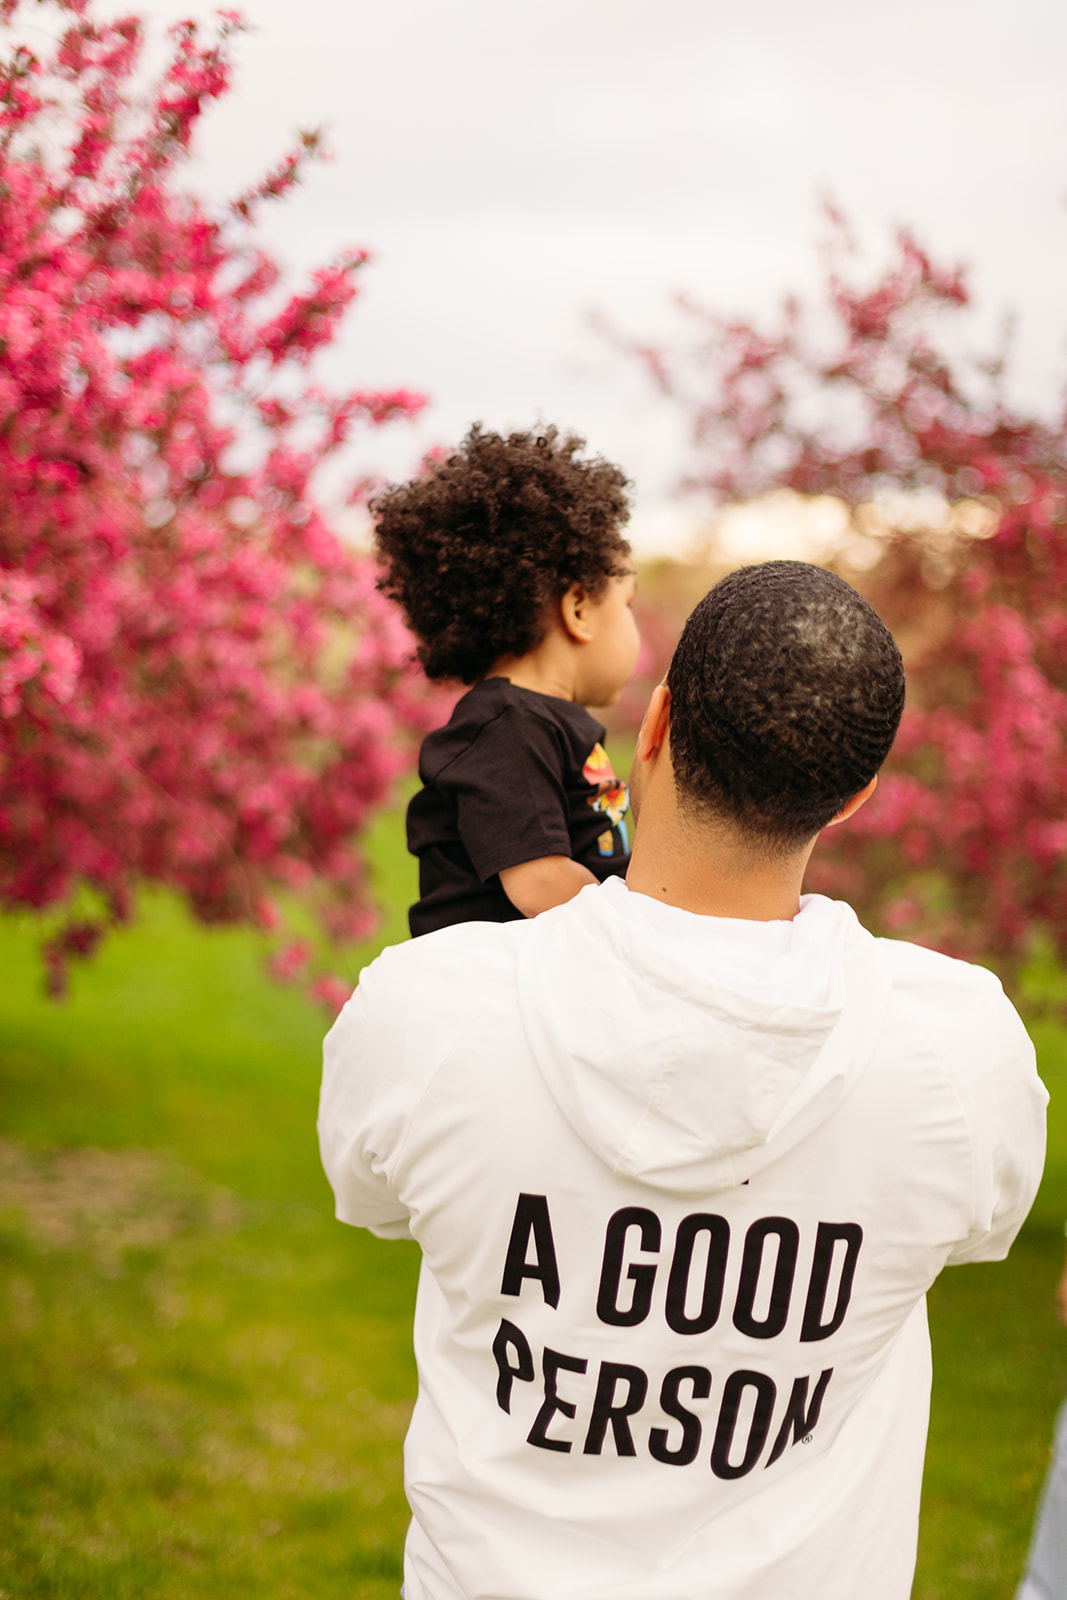 Be A Good Person brand sweatshirt in Denver Colorado with cherry blossom trees for family photos